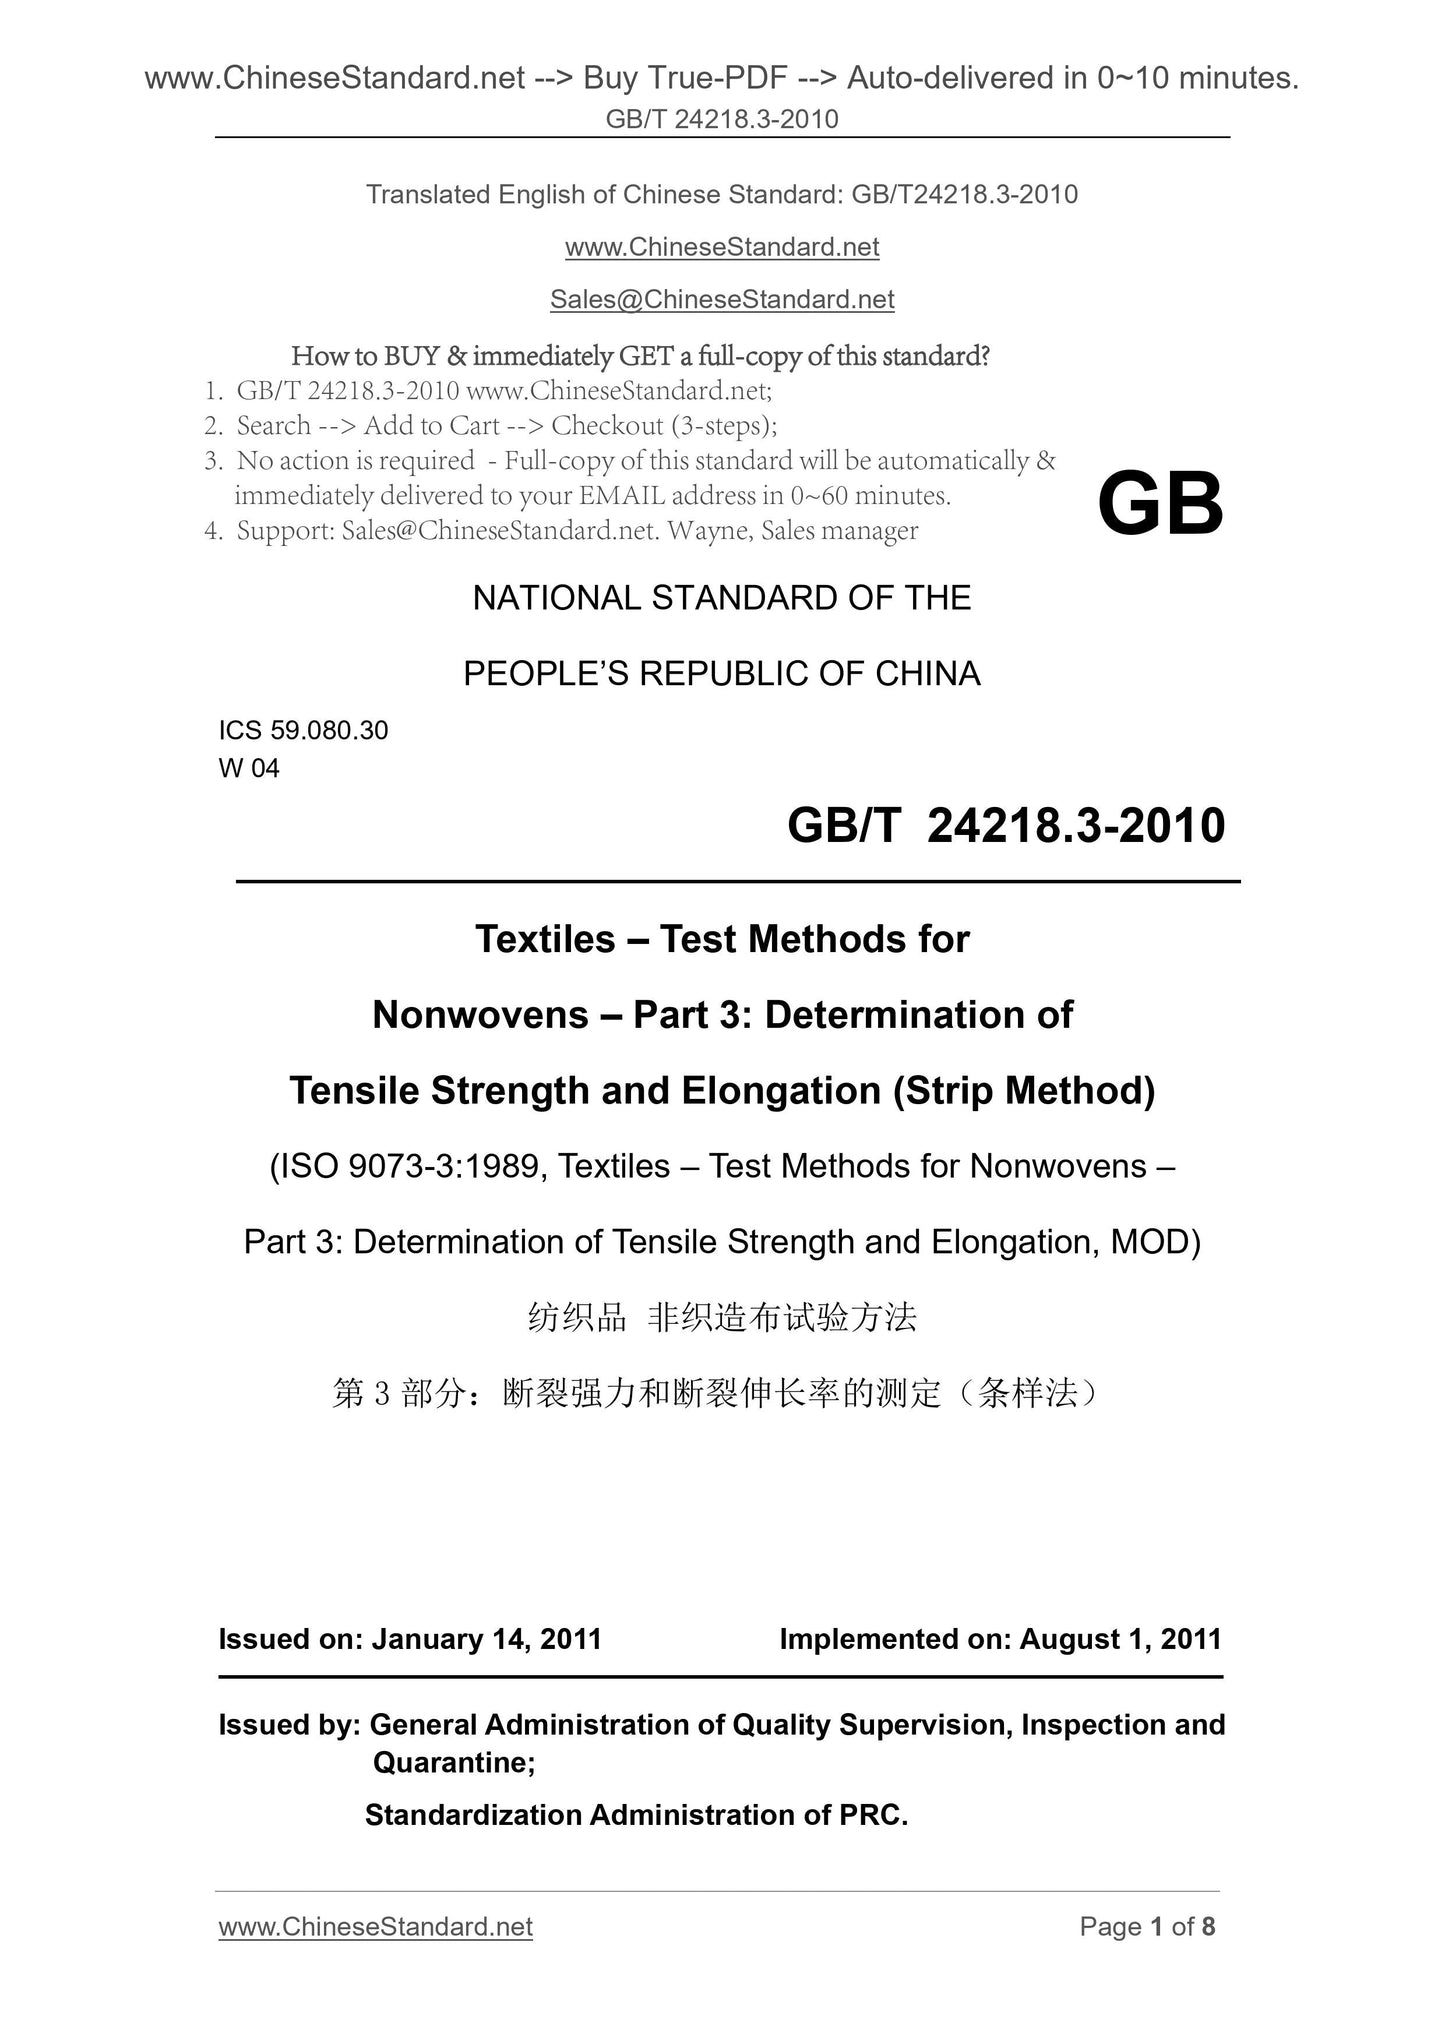 GB/T 24218.3-2010 Page 1